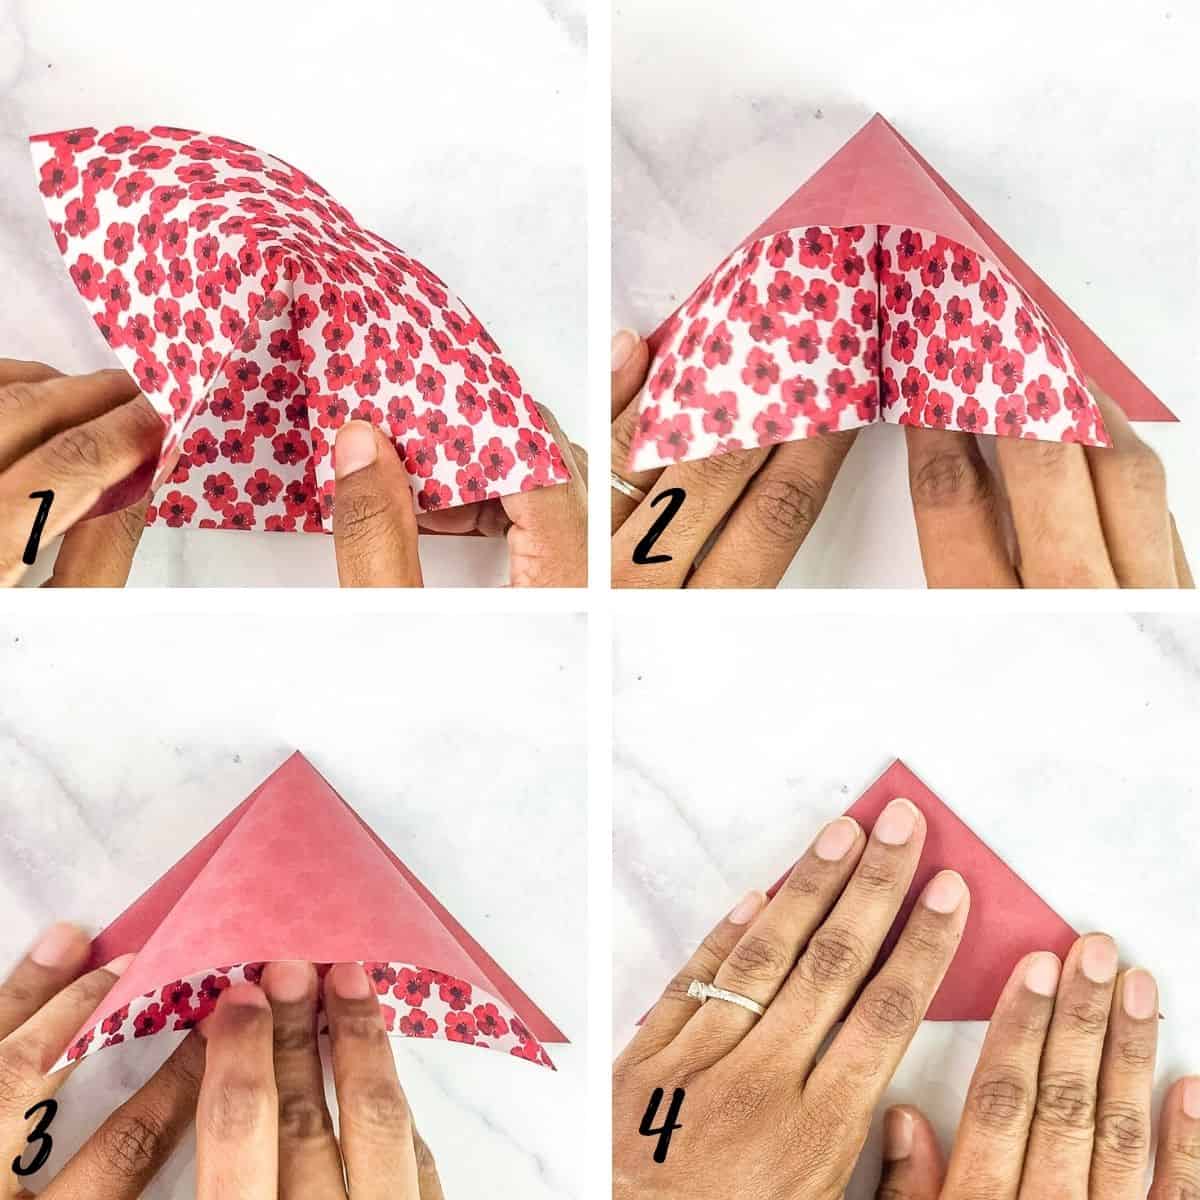 A poster of 4 images showing how to fold a triangle.